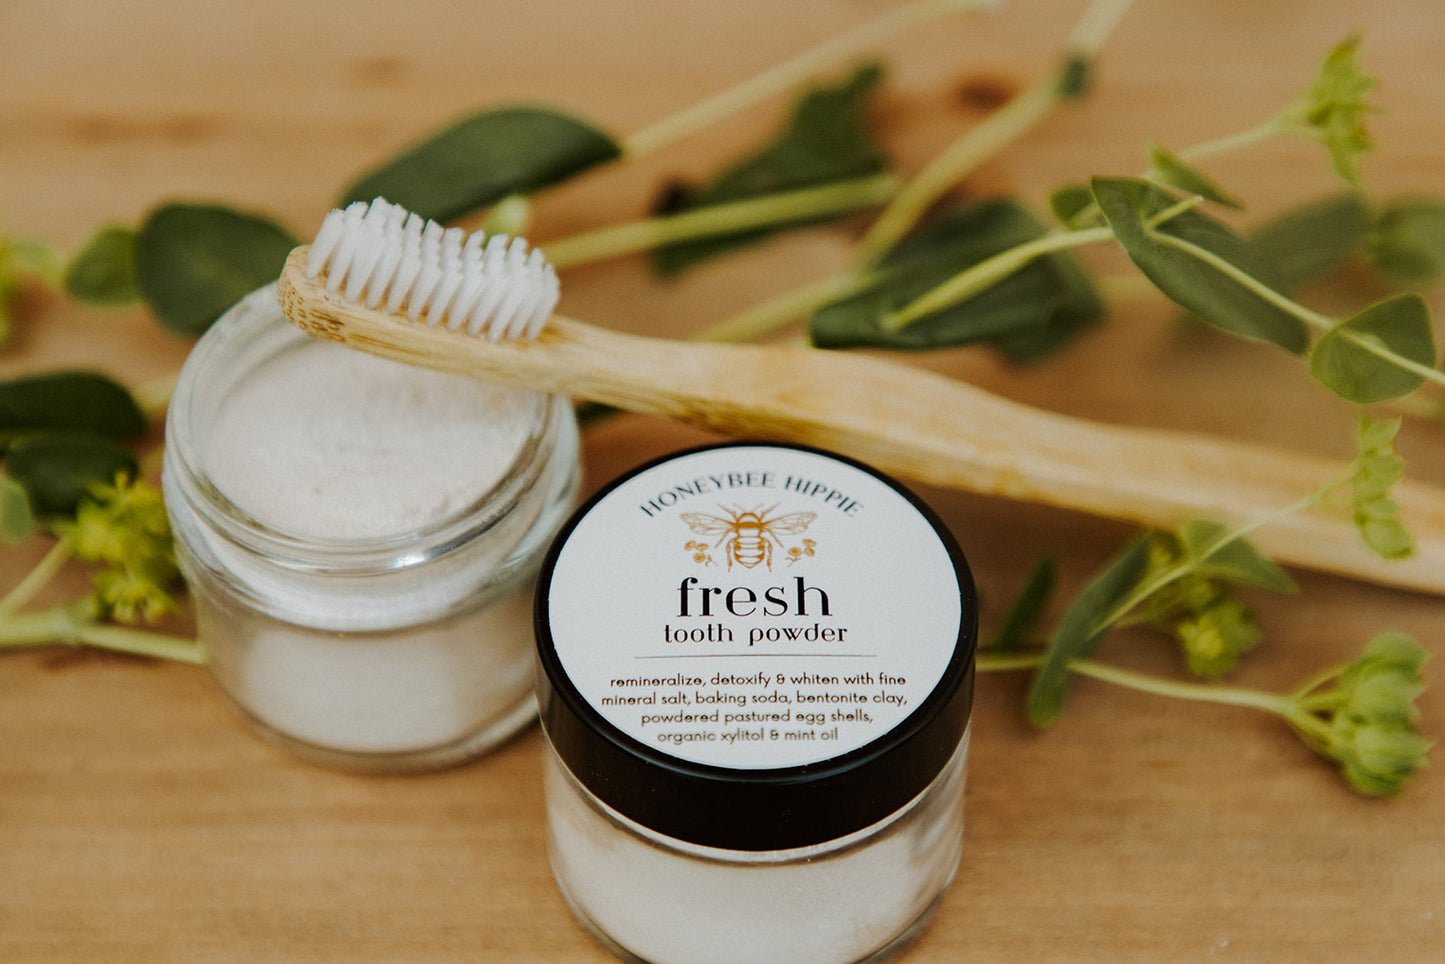 jars of fresh tooth powder developed by honeybee hippie to whiten teeth with natural ingredients